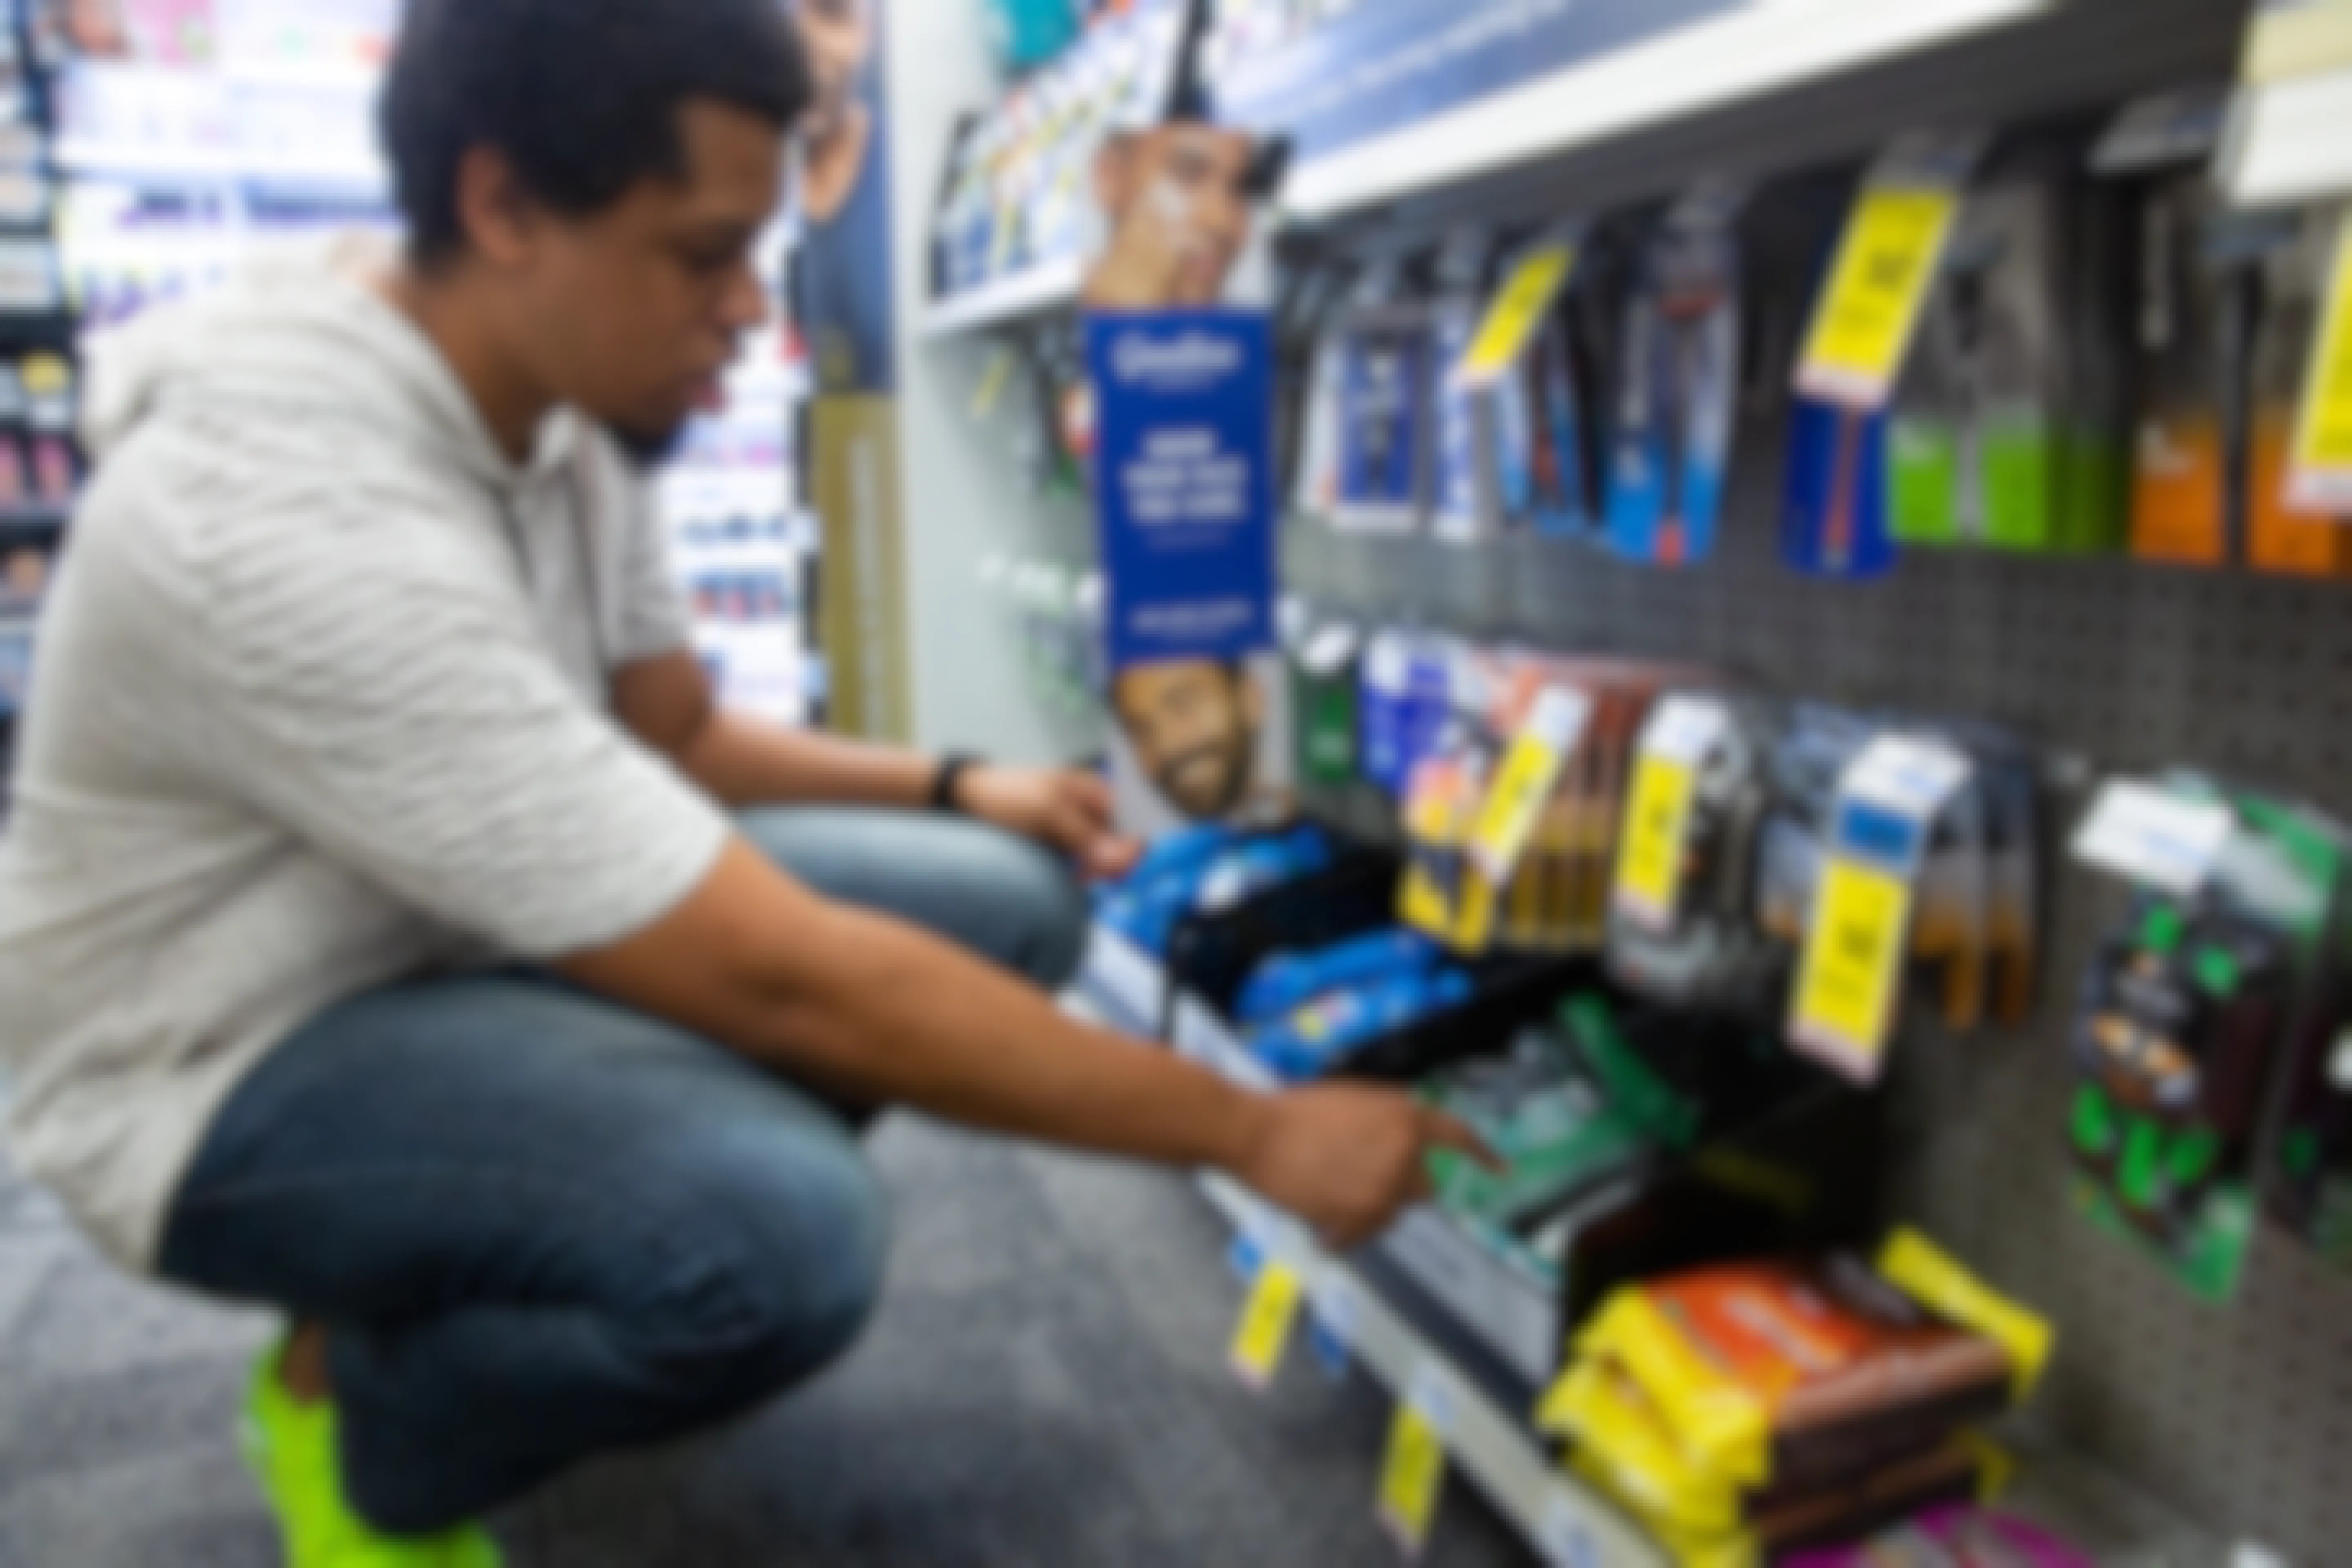 Person bending down to look closer at gillette branded razors at CVS Pharmacy